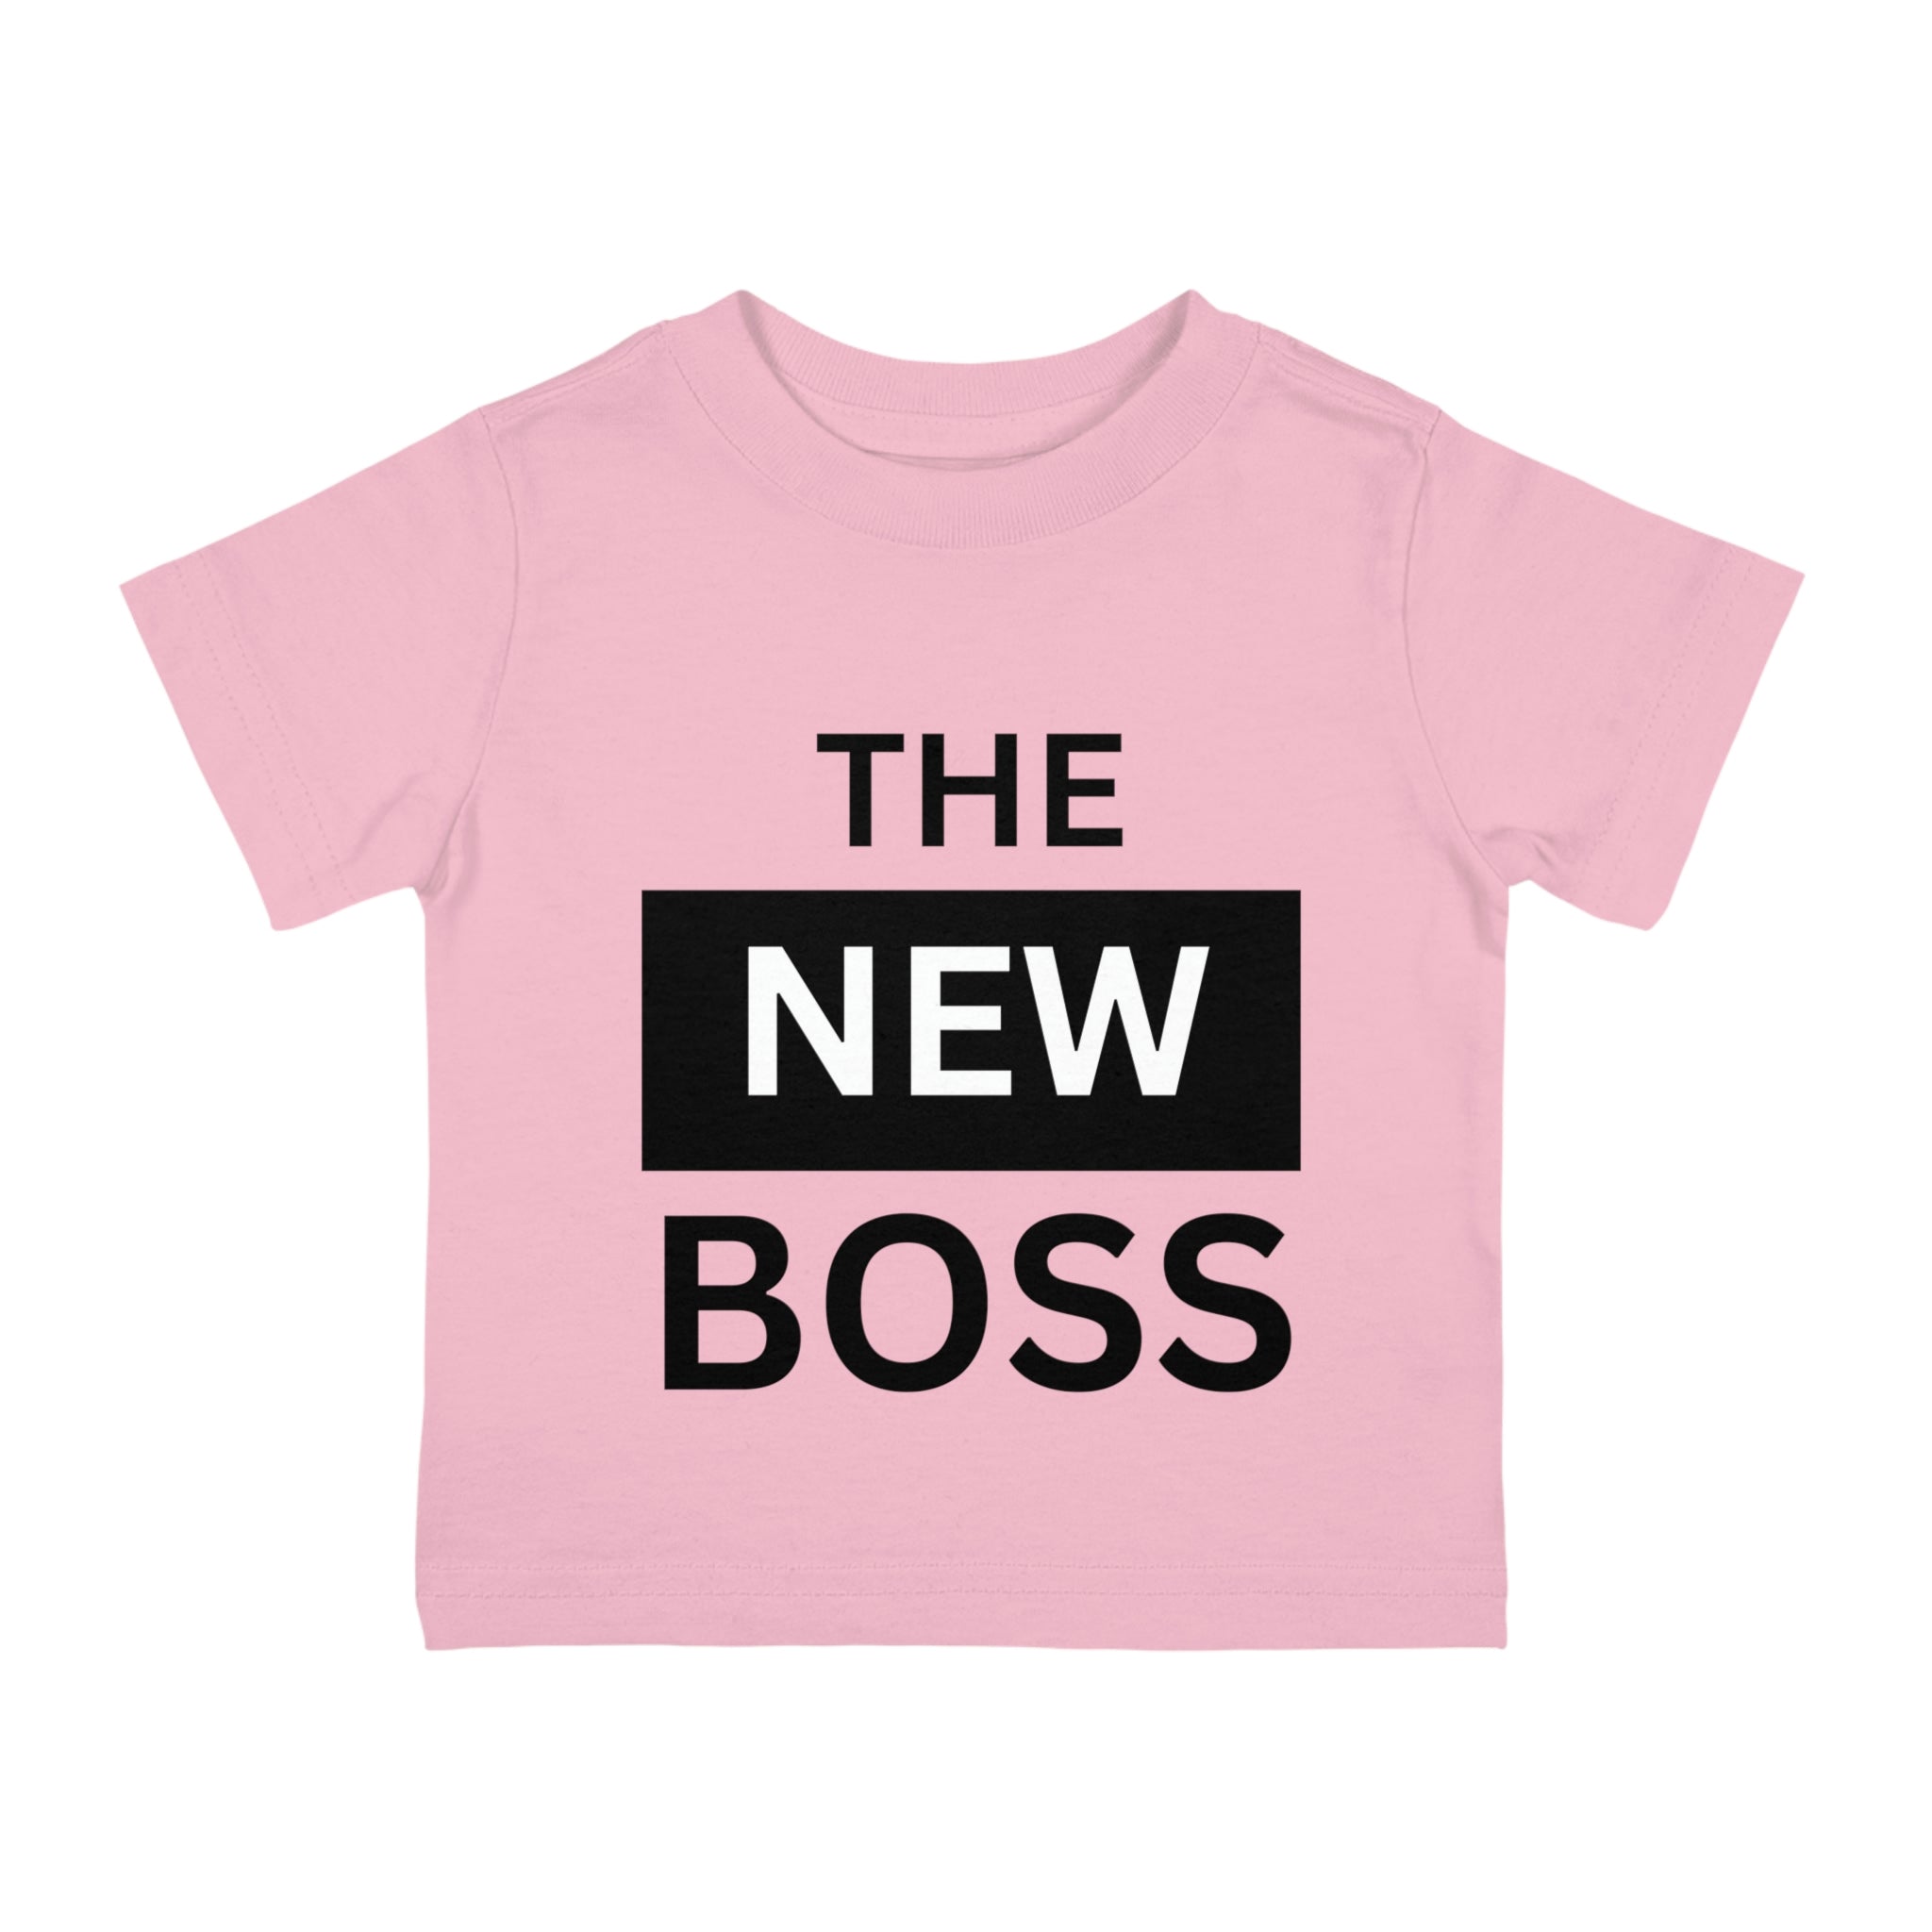 The New Boss Infant Shirt, Baby Tee, Infant Tee